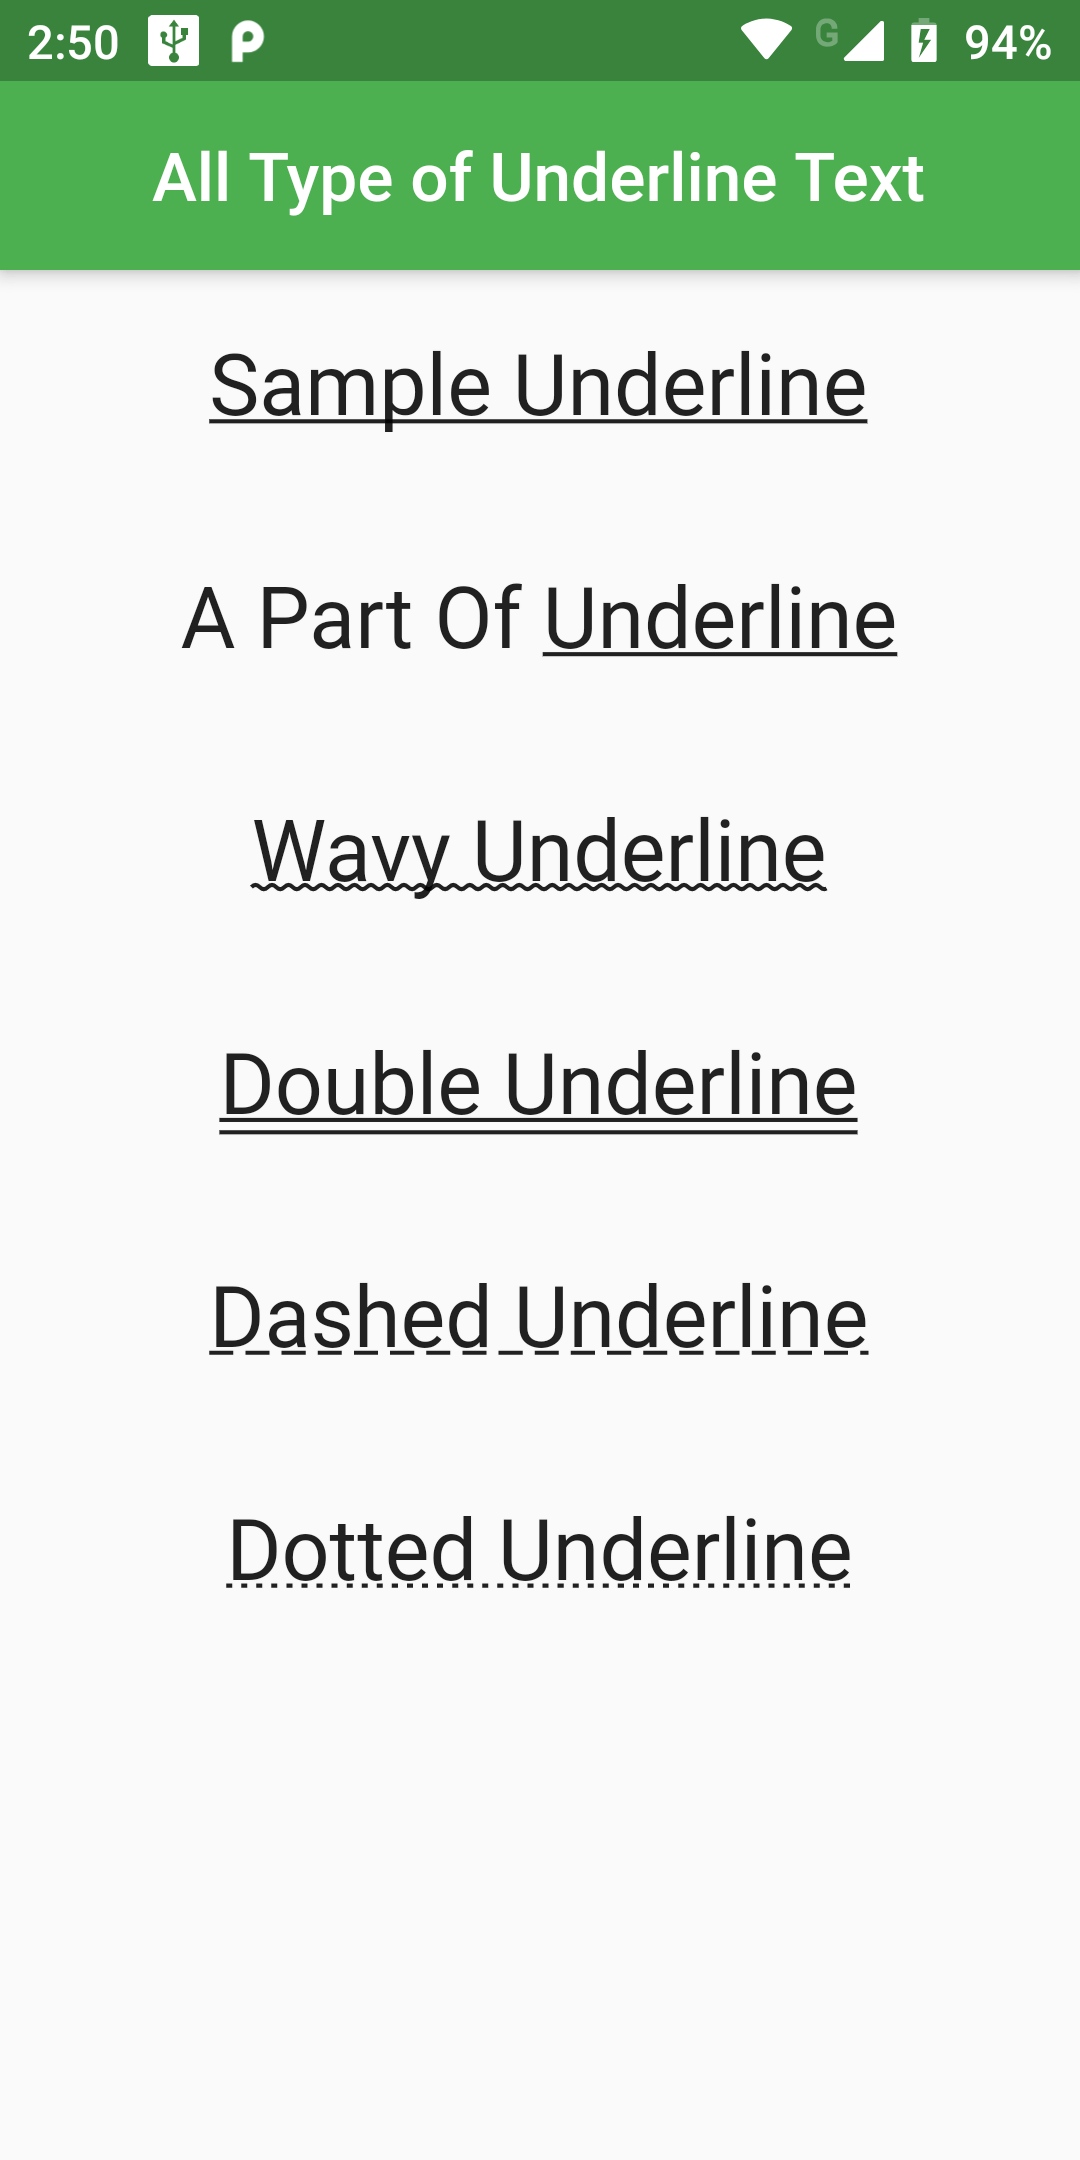 All Types Of Underline Text In Flutter Android App